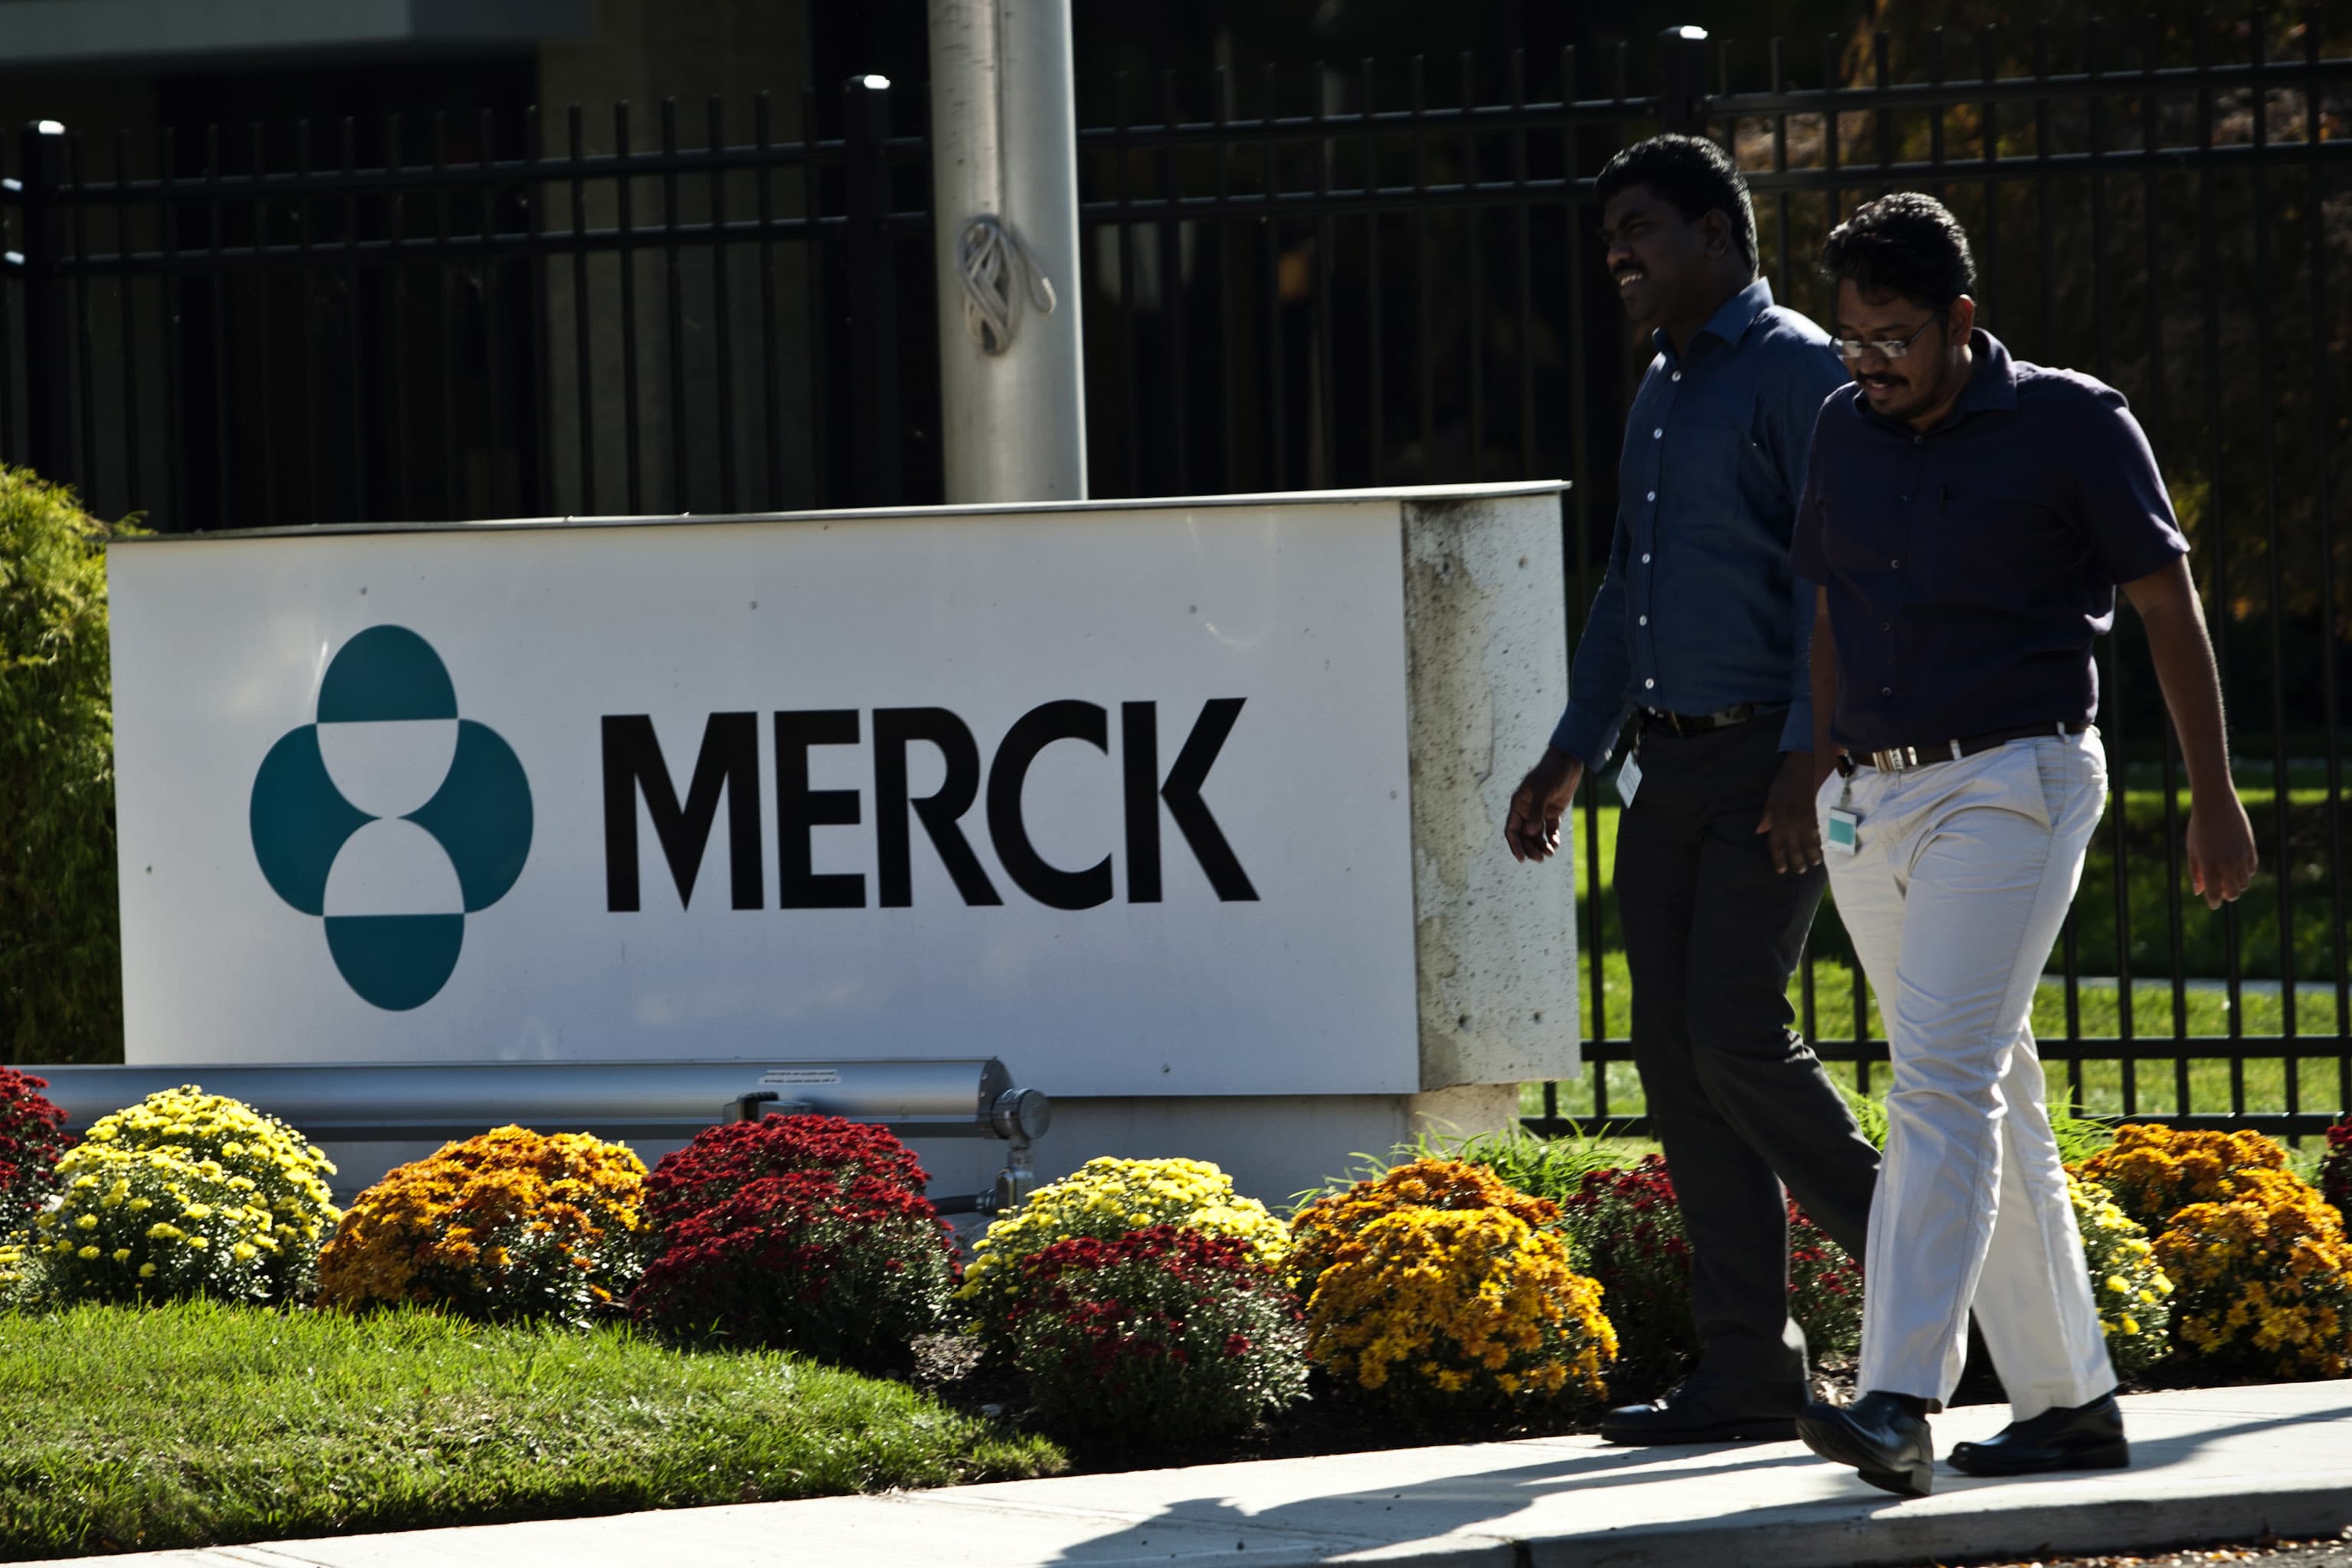 Stocks making the biggest moves premarket: Merck, Lordstown Motors, Coty, Zoom and others thumbnail